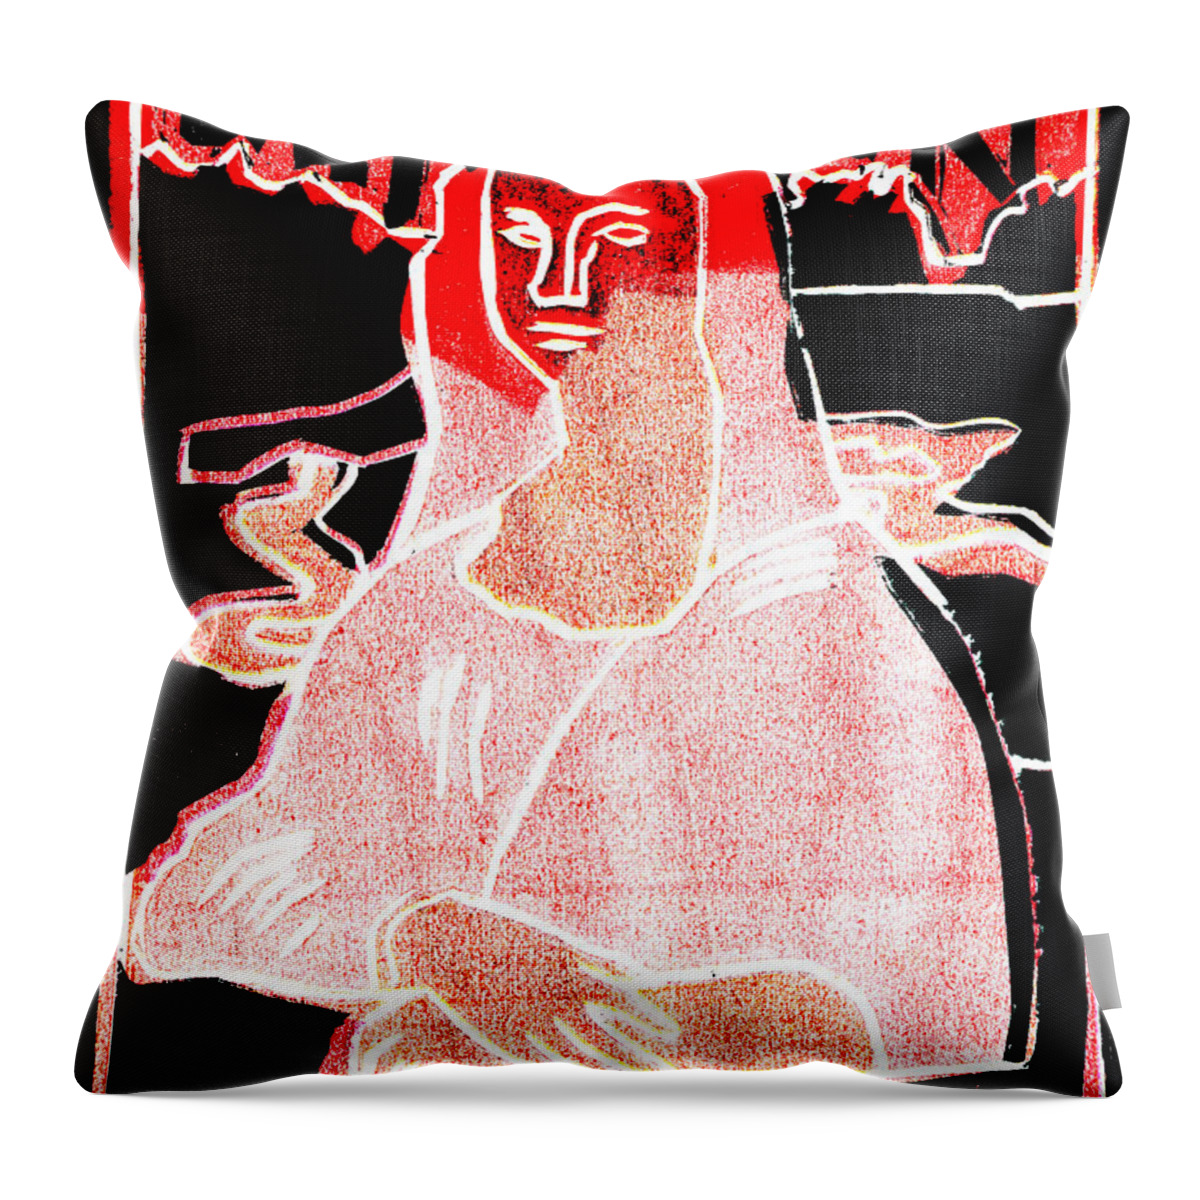 Mona Lisa Throw Pillow featuring the relief Black Ivory Mona Lisa 22 by Edgeworth Johnstone